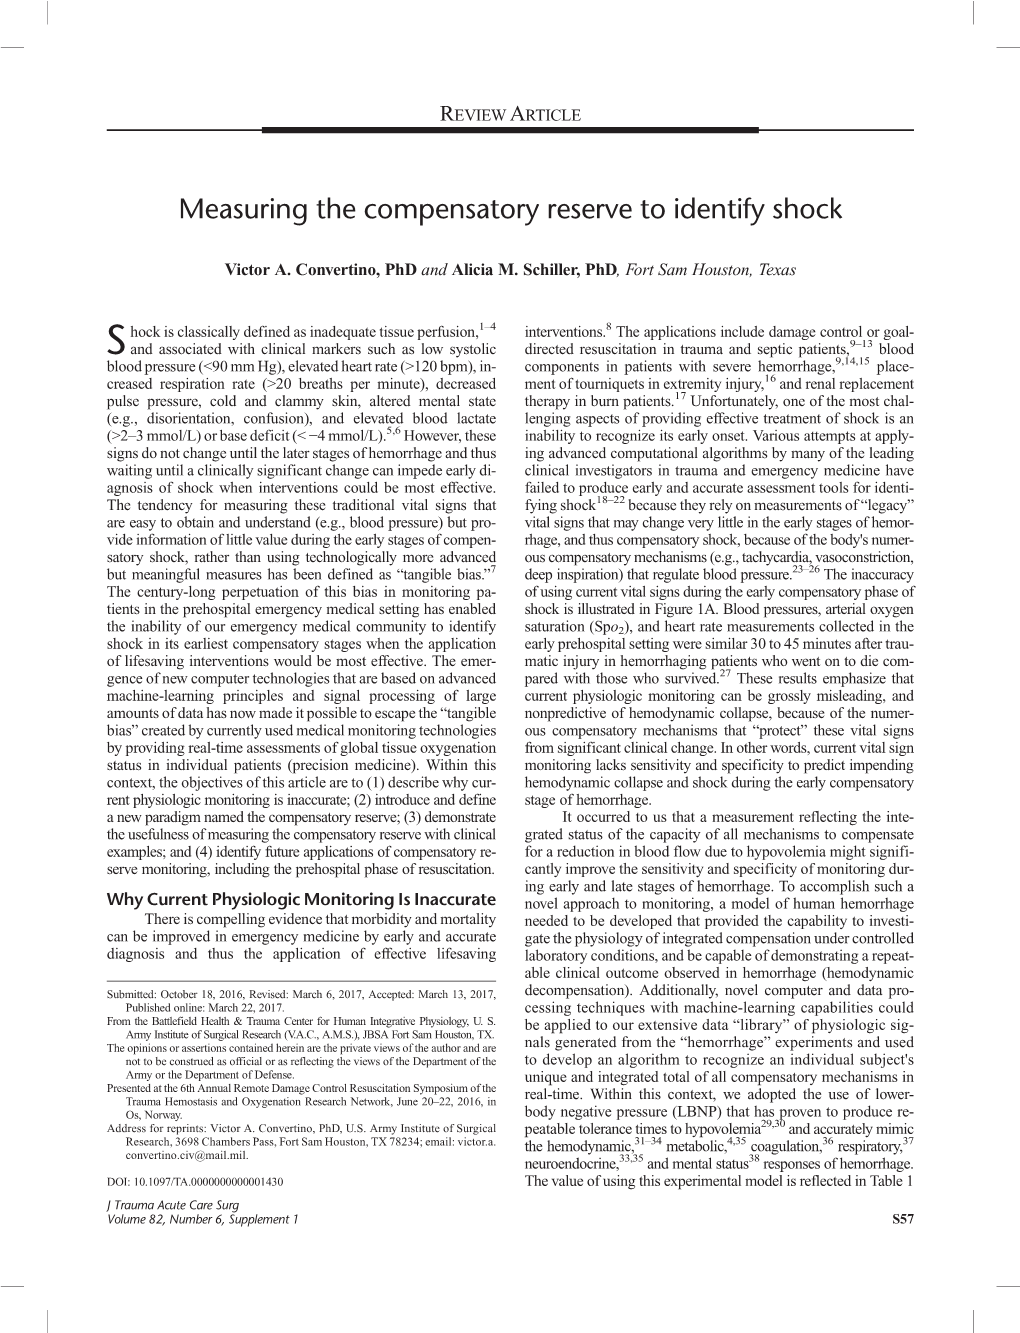 Measuring the Compensatory Reserve to Identify Shock